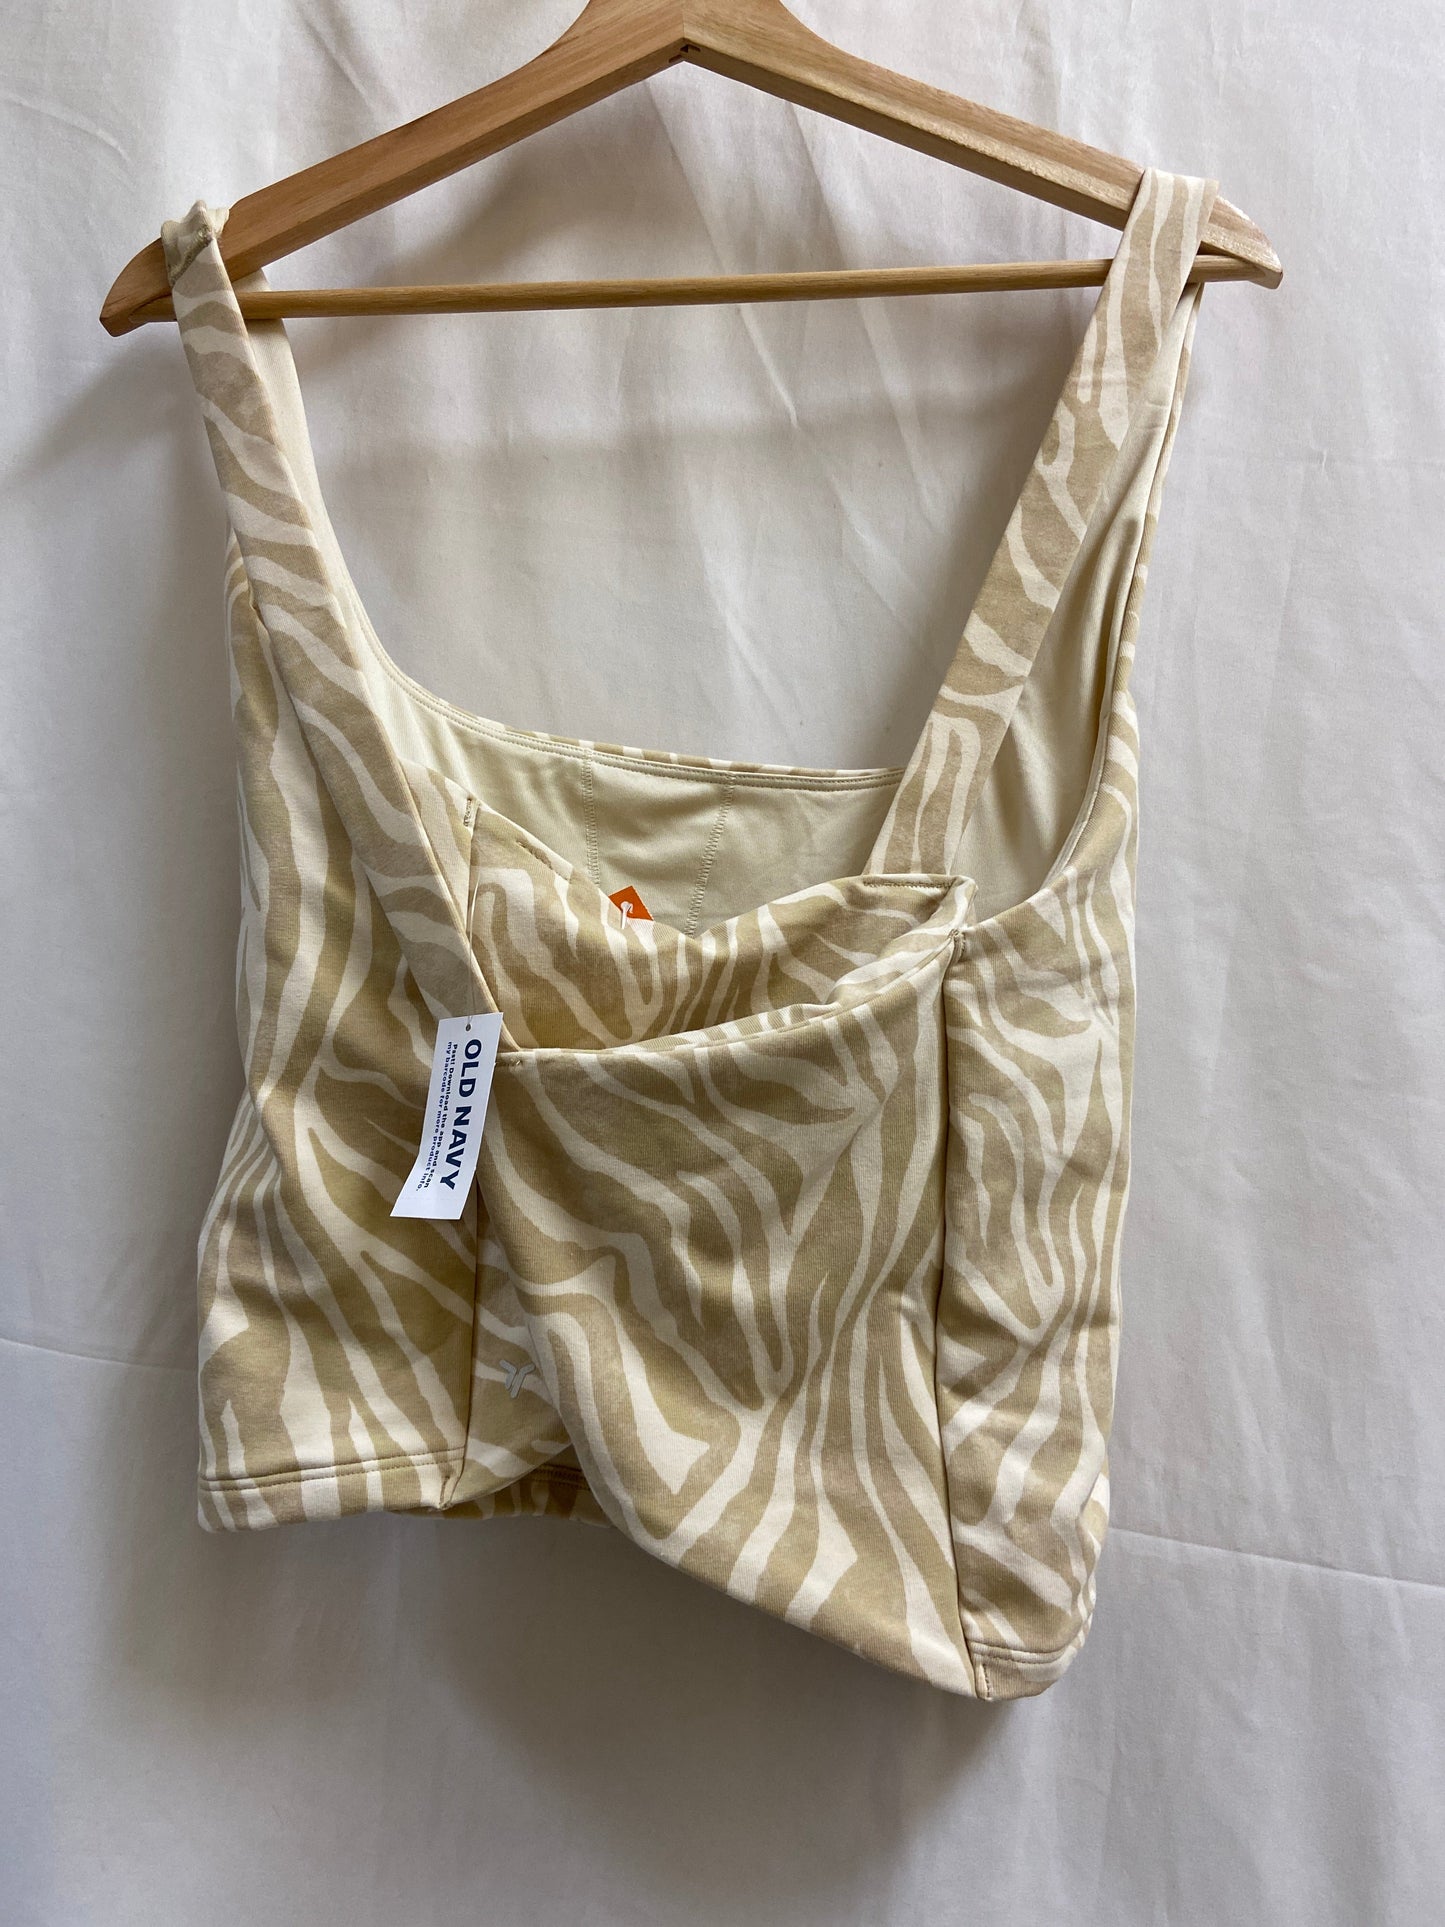 Athletic Tank Top By Old Navy  Size: 3x